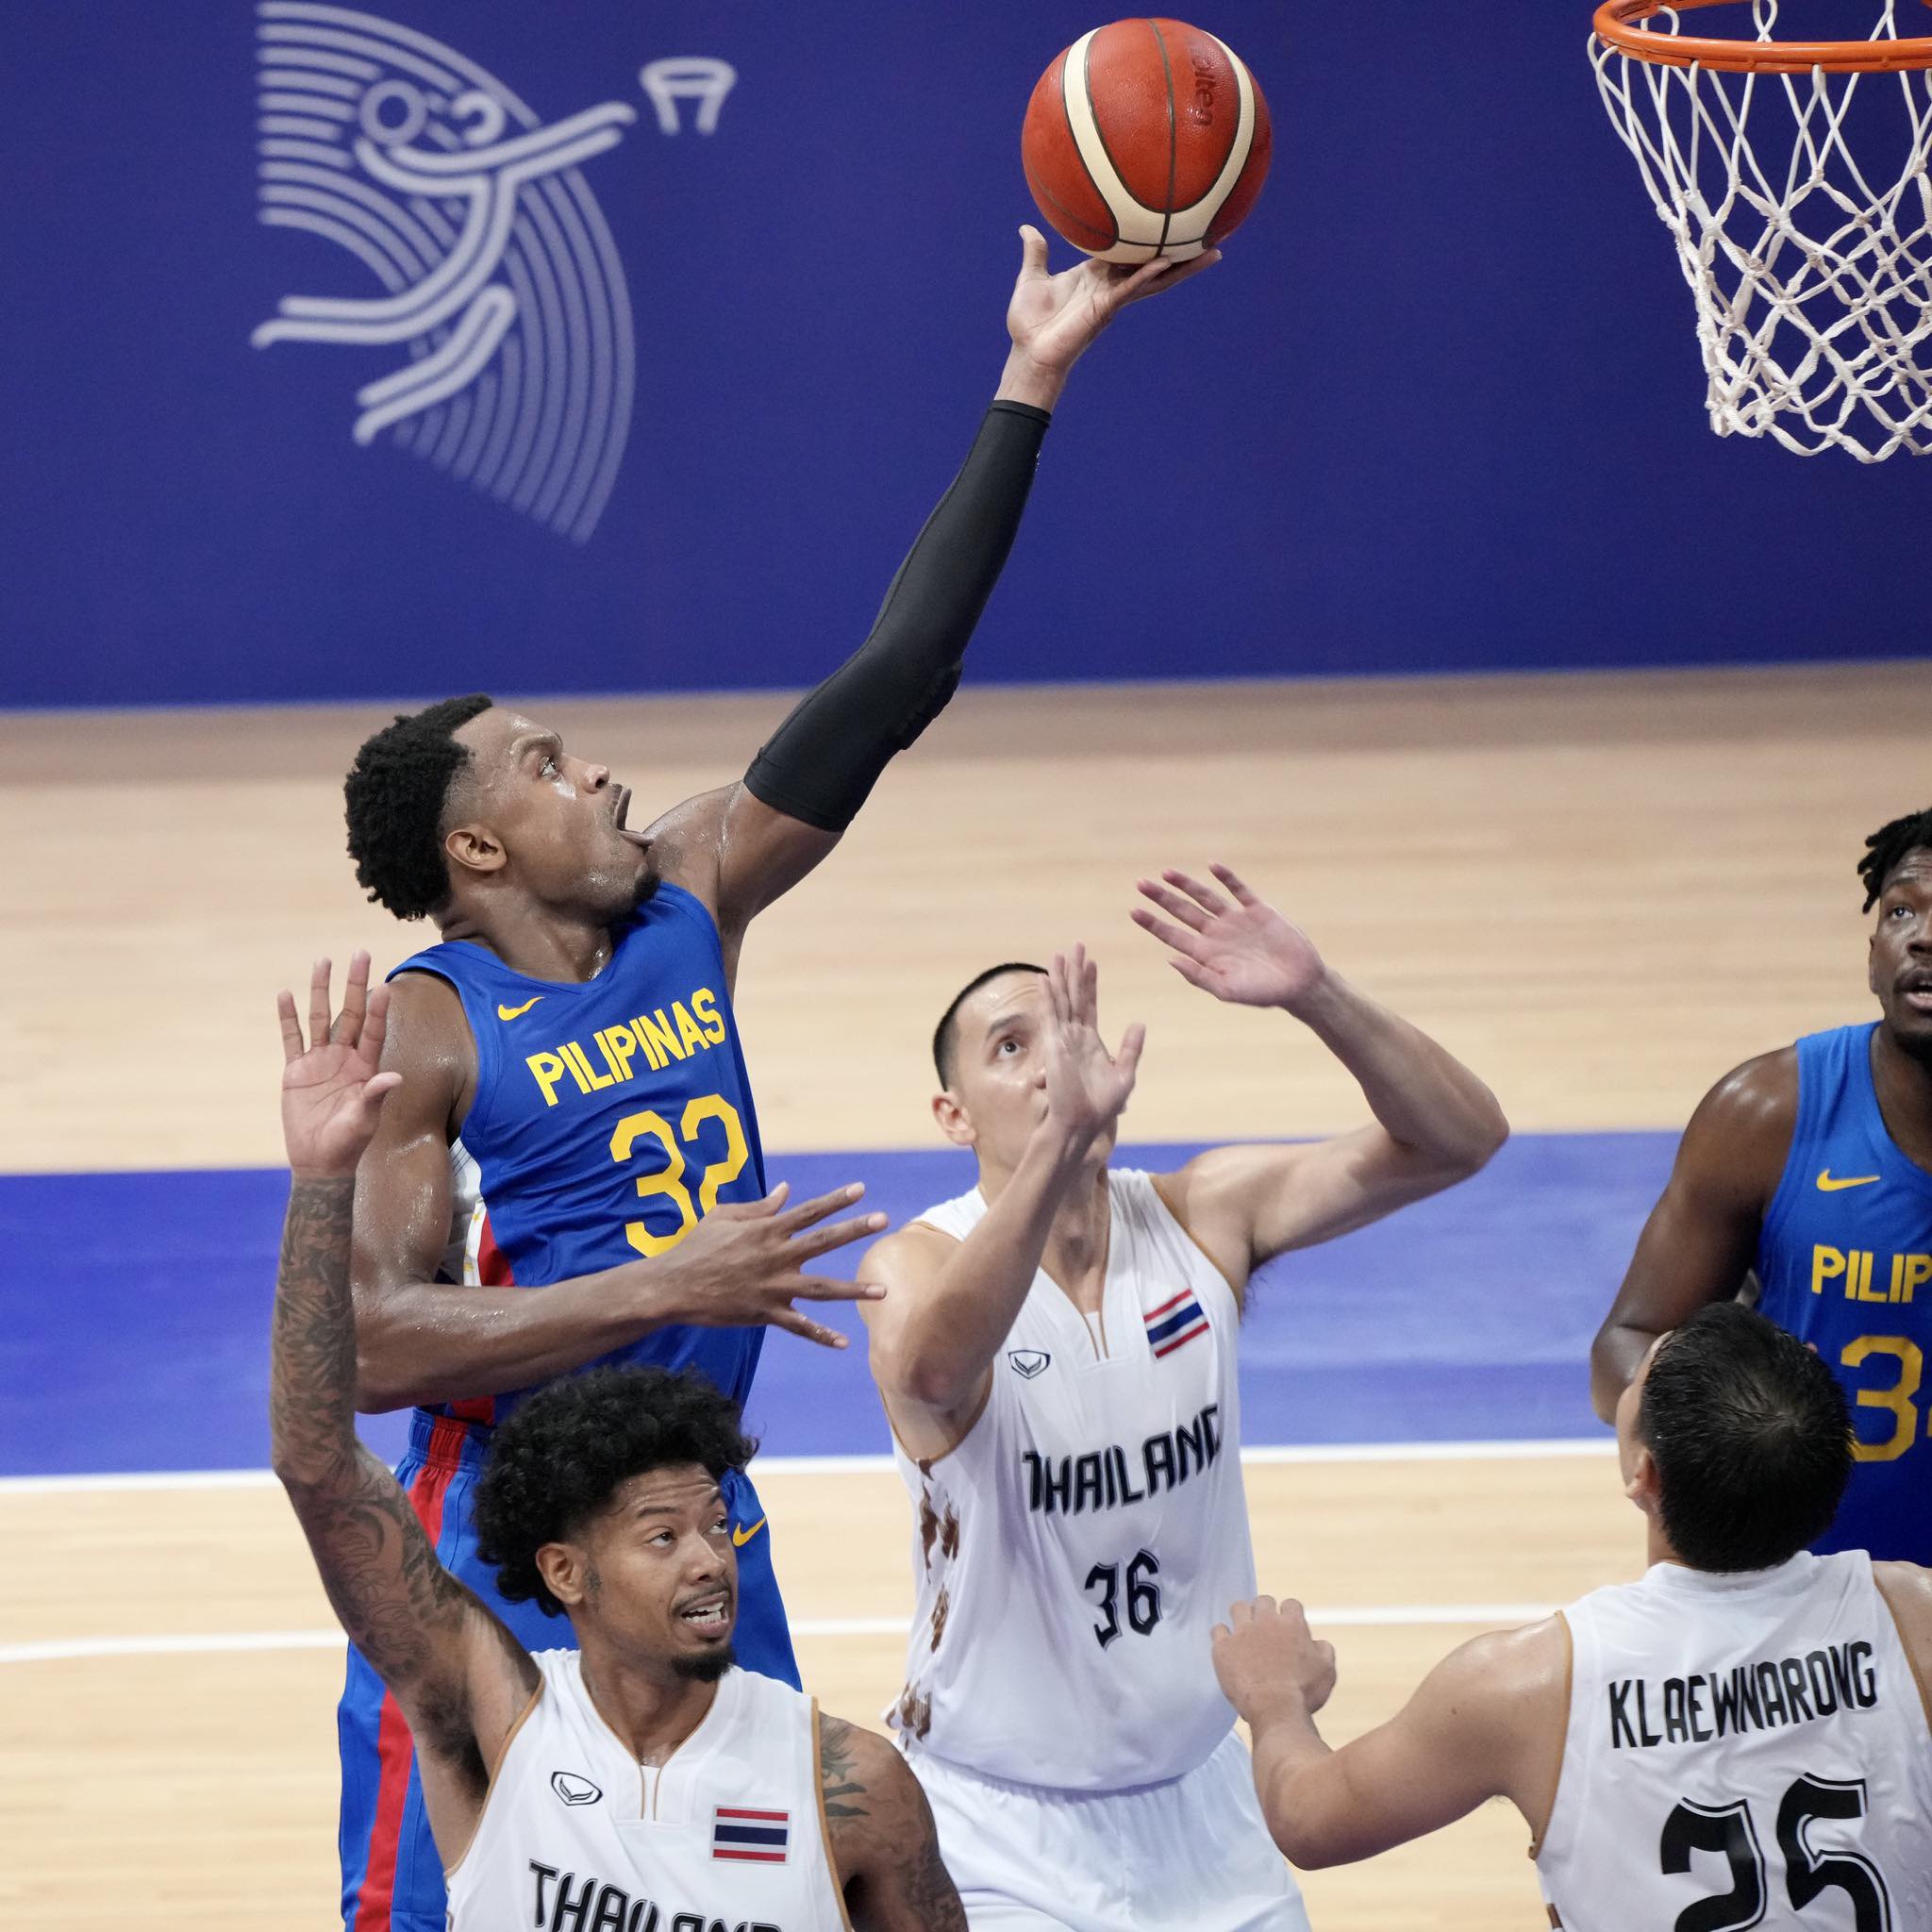 Justin Brownlee leads Gilas Pilipinas past Thailand in the Asian Games basketball competition. –POOL